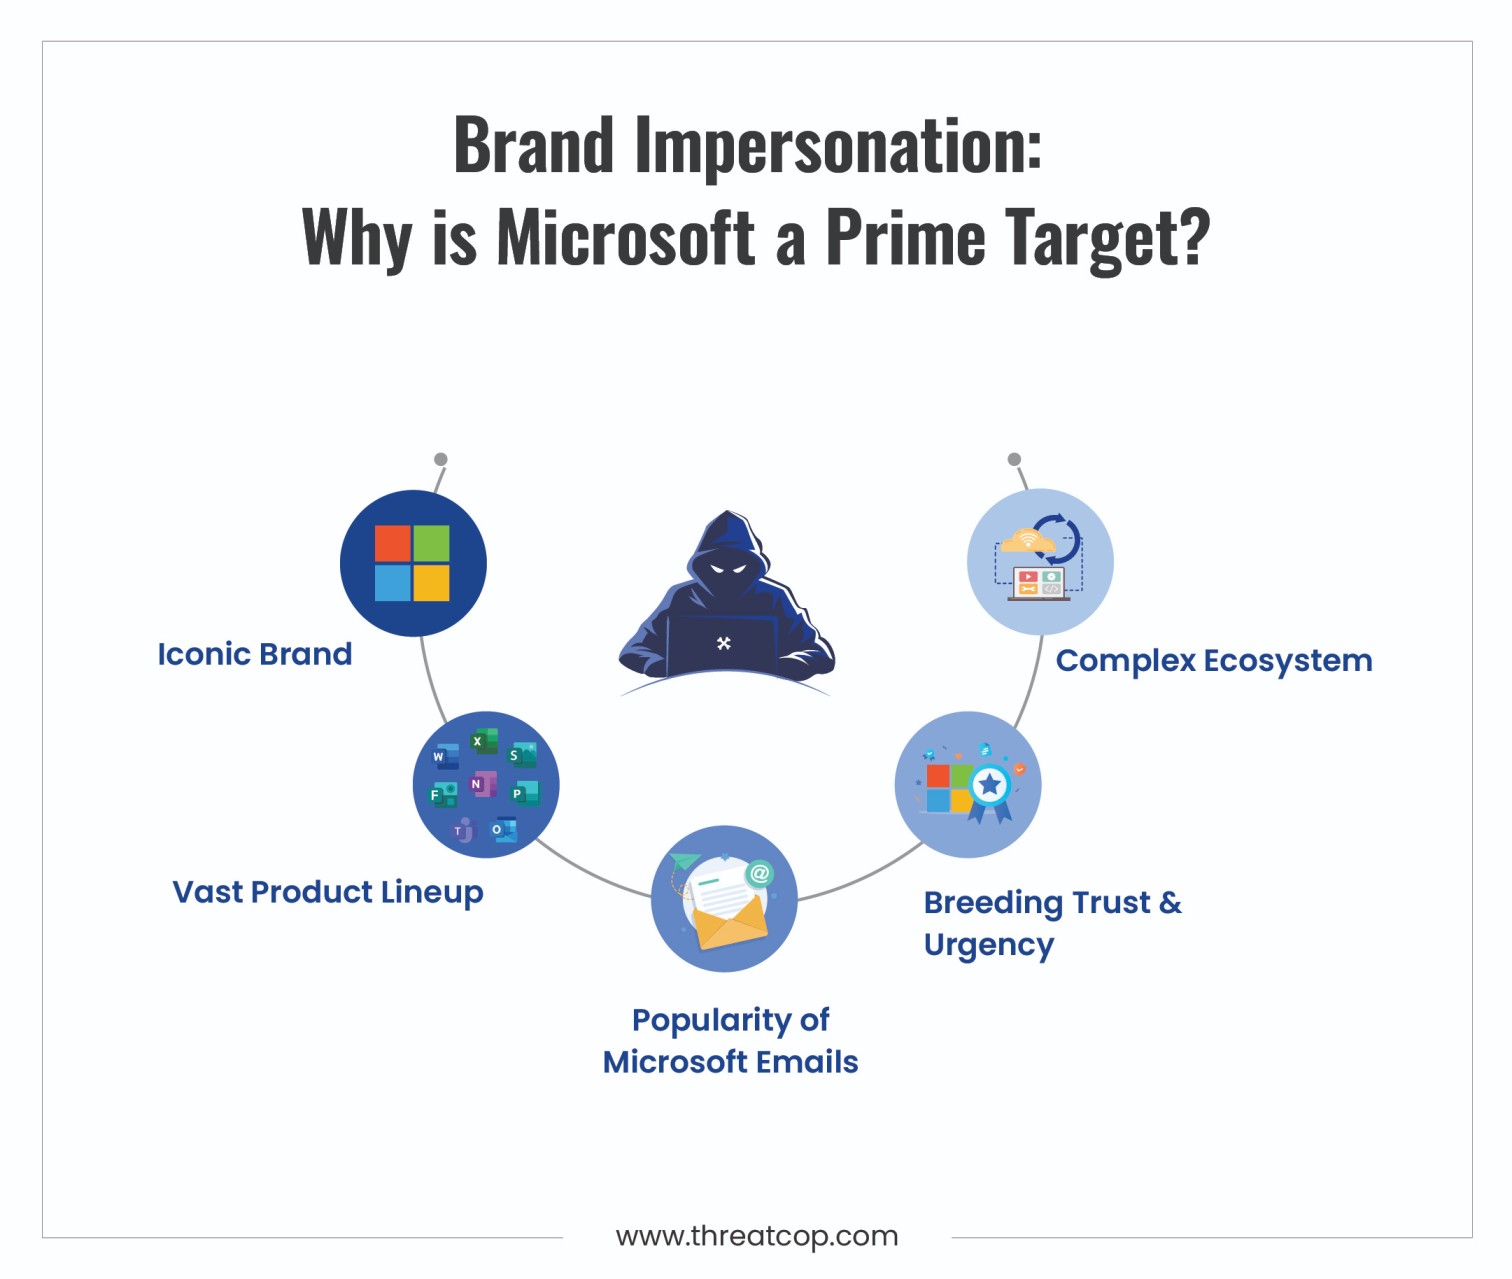 Why is Microsoft favorite brand for impersonation attack